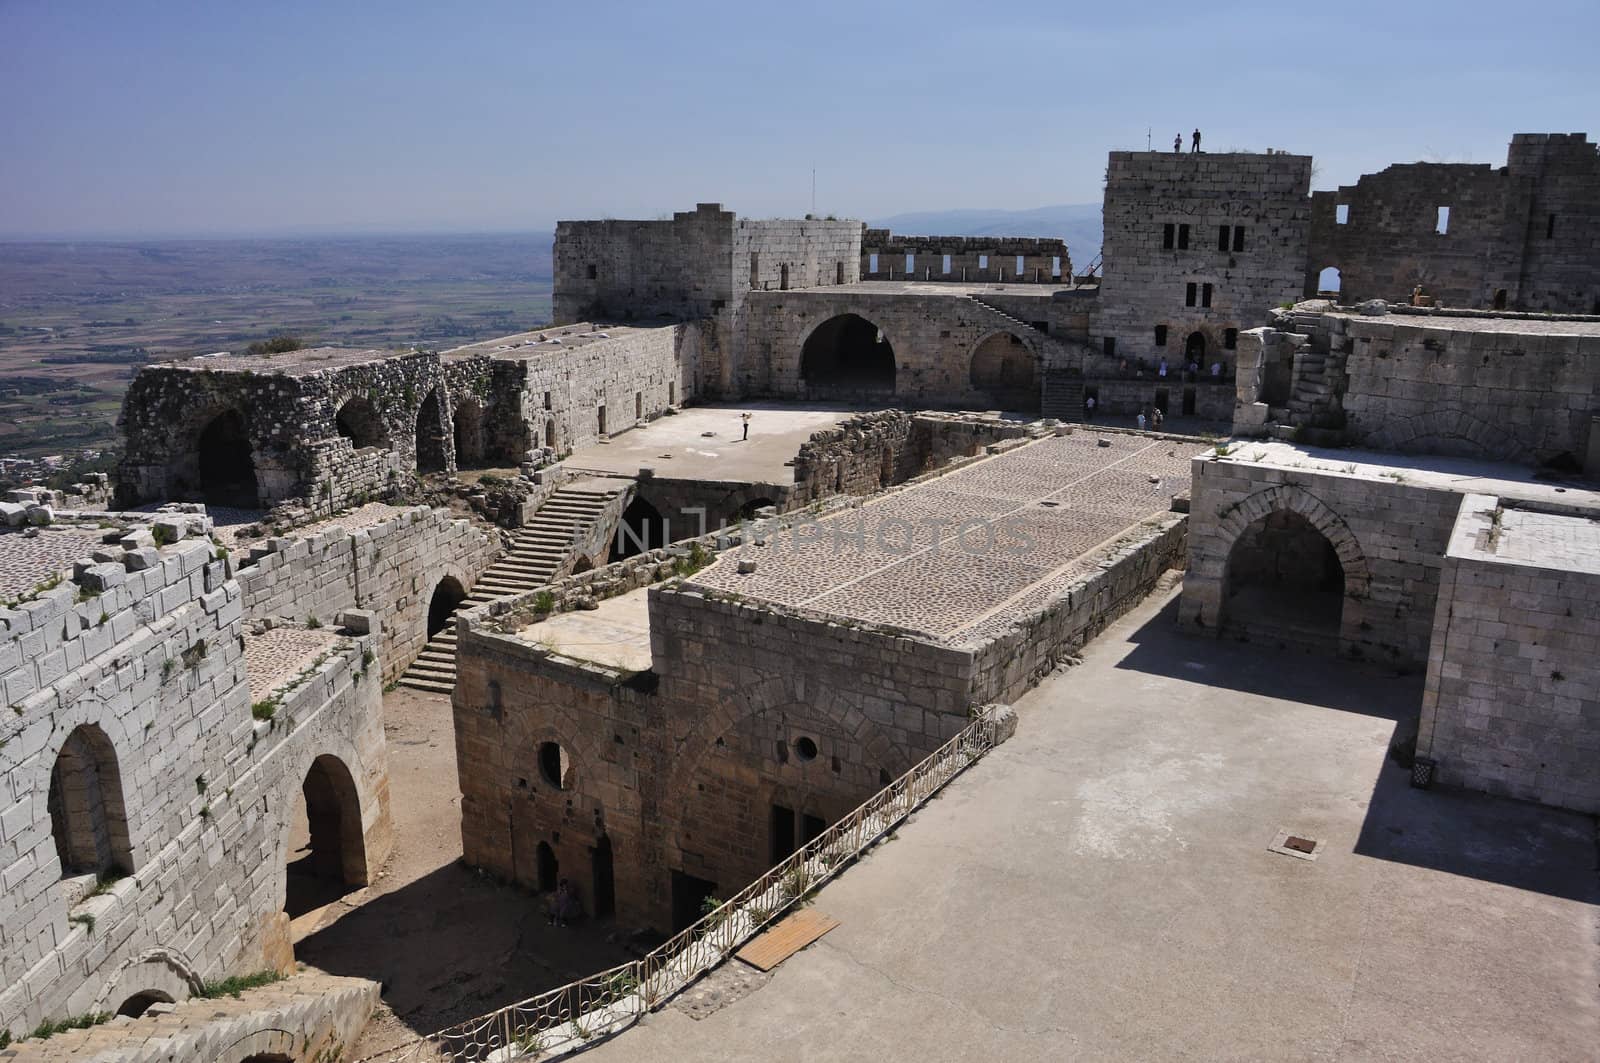 Krak des Chevaliers, transliterated Crac des Chevaliers, is a Crusader fortress in Syria and one of the most important preserved medieval military castles in the world.